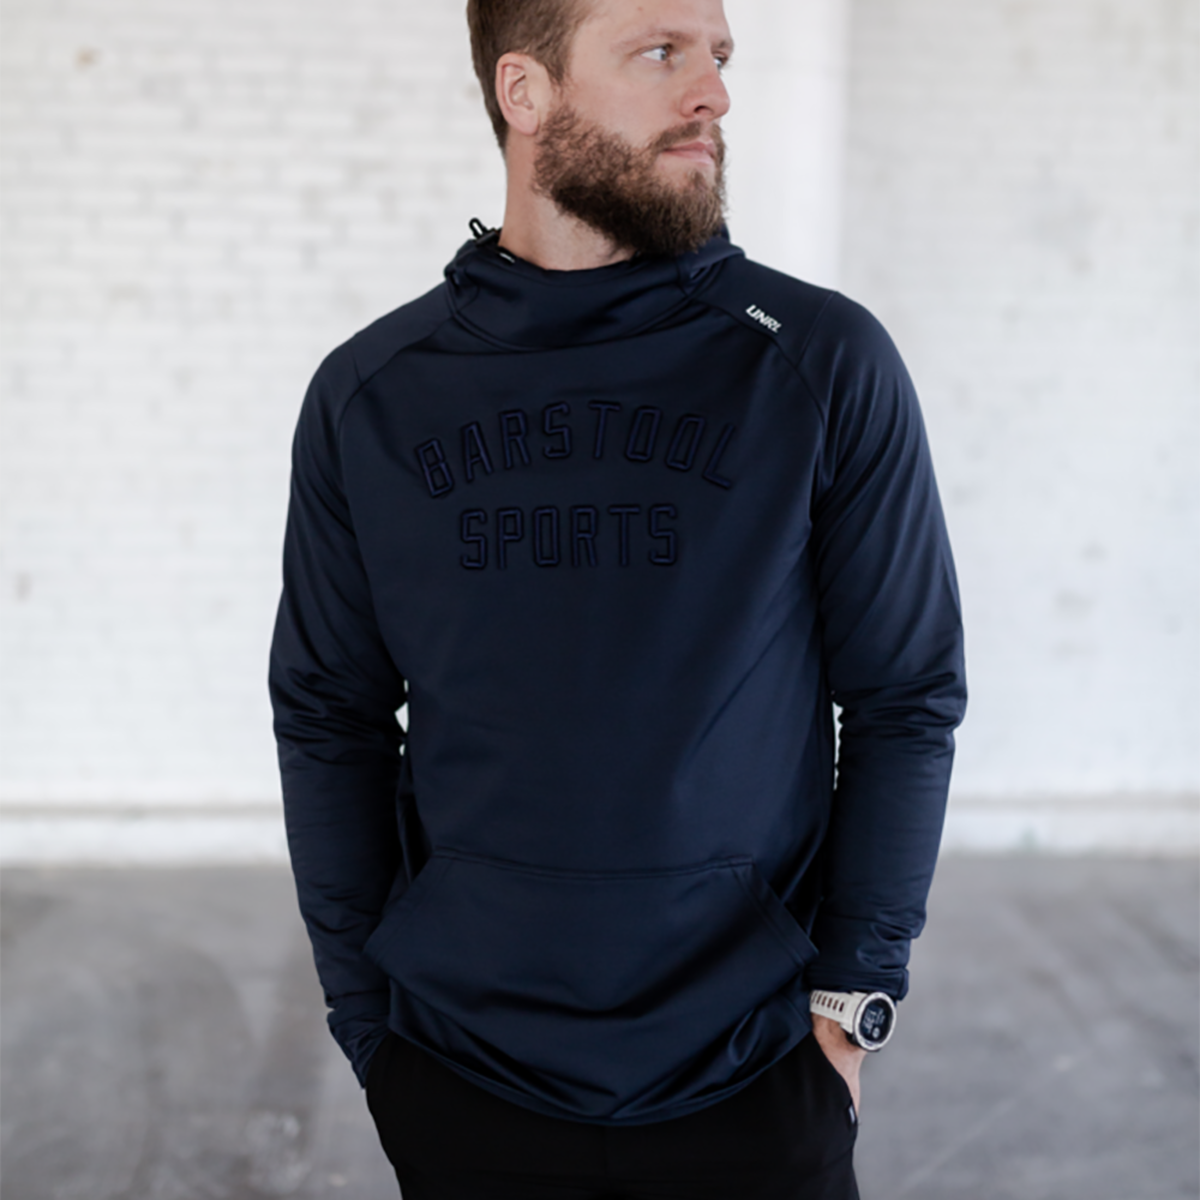 Unrl X Barstool Sports Monochrome Crossover Hoodie Ii Pga Tour Superstore